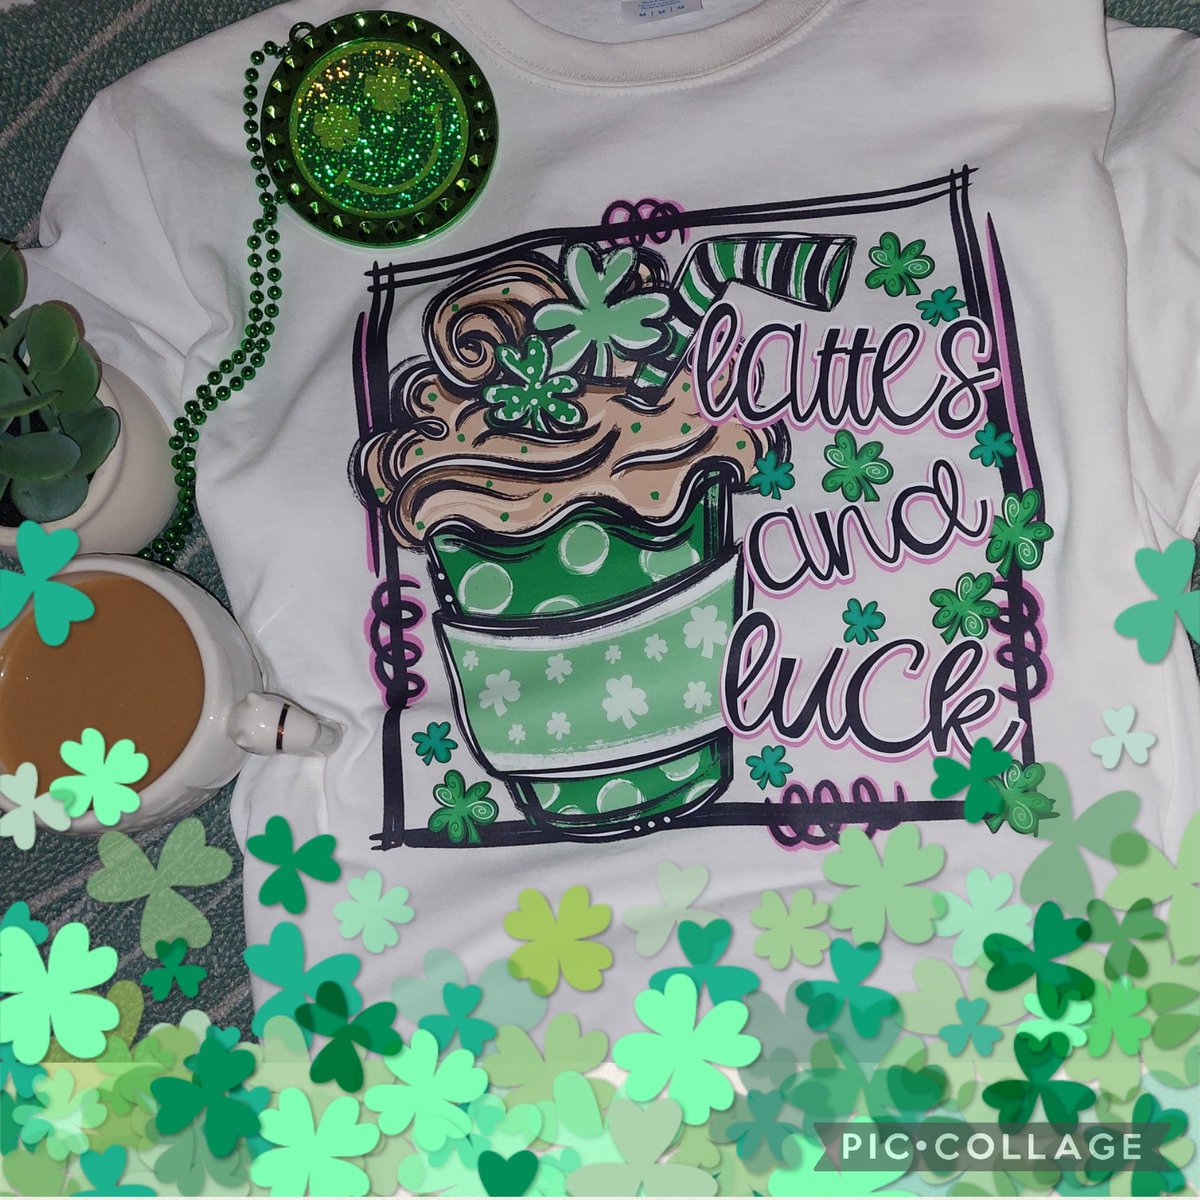 🍀☘️🍀St..Pattys Swag in stock!🍀☘️🍀 $15!!!! Can be shipped or pick up locally l-l-creations-2043.myshopify.com